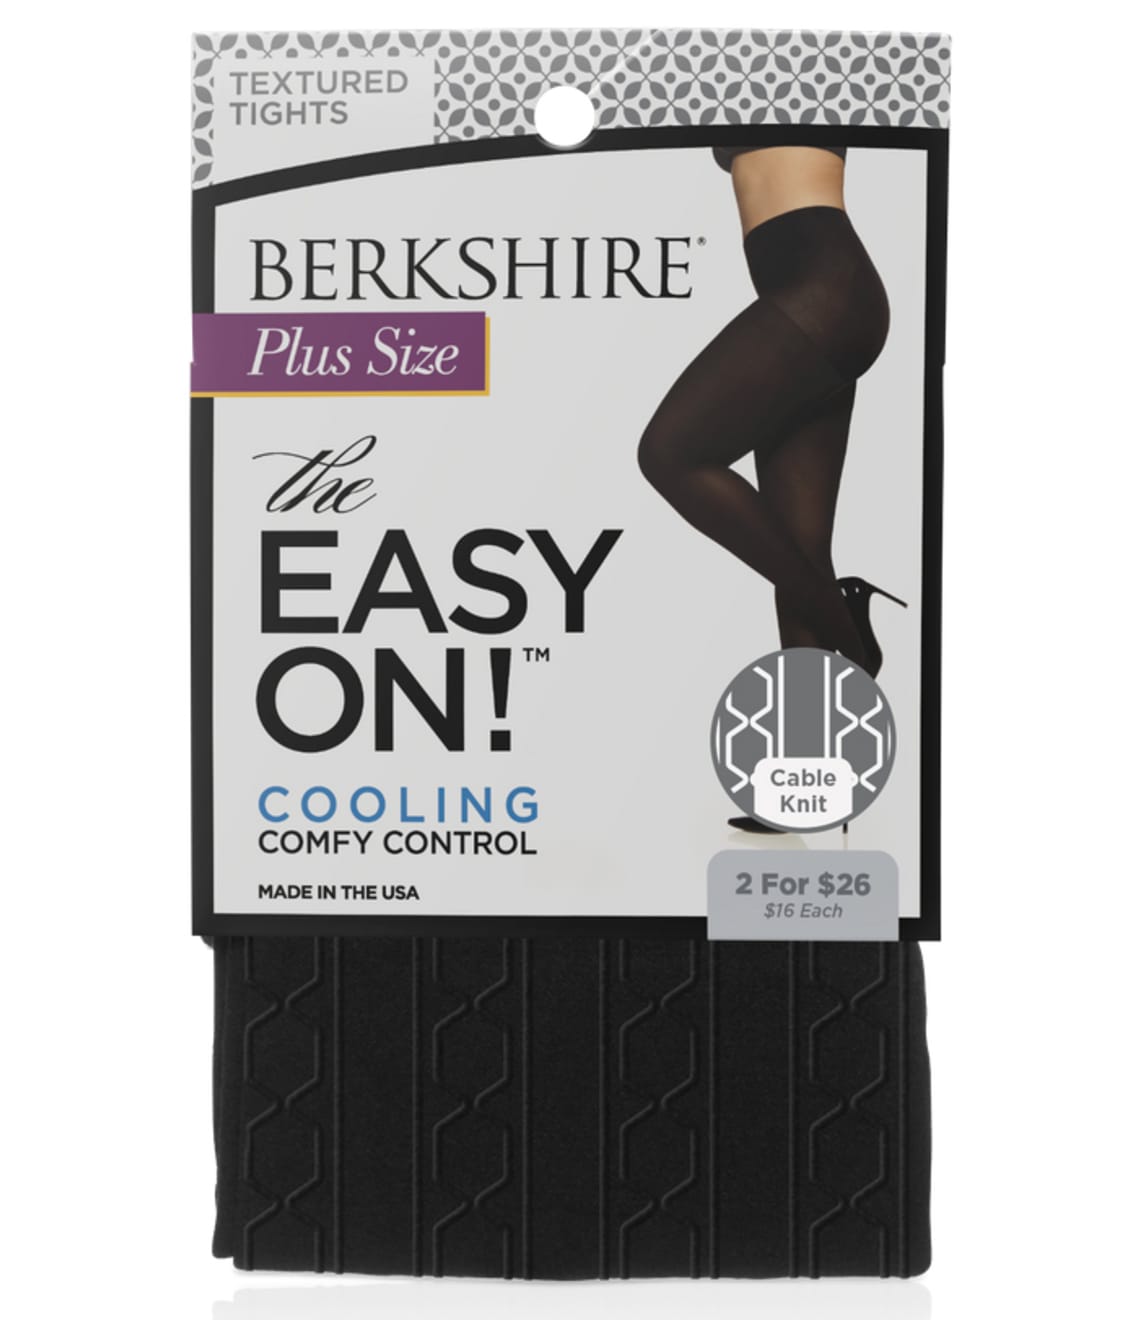 Berkshire Womens Plus Size The Easy On Cable Knit Tights 